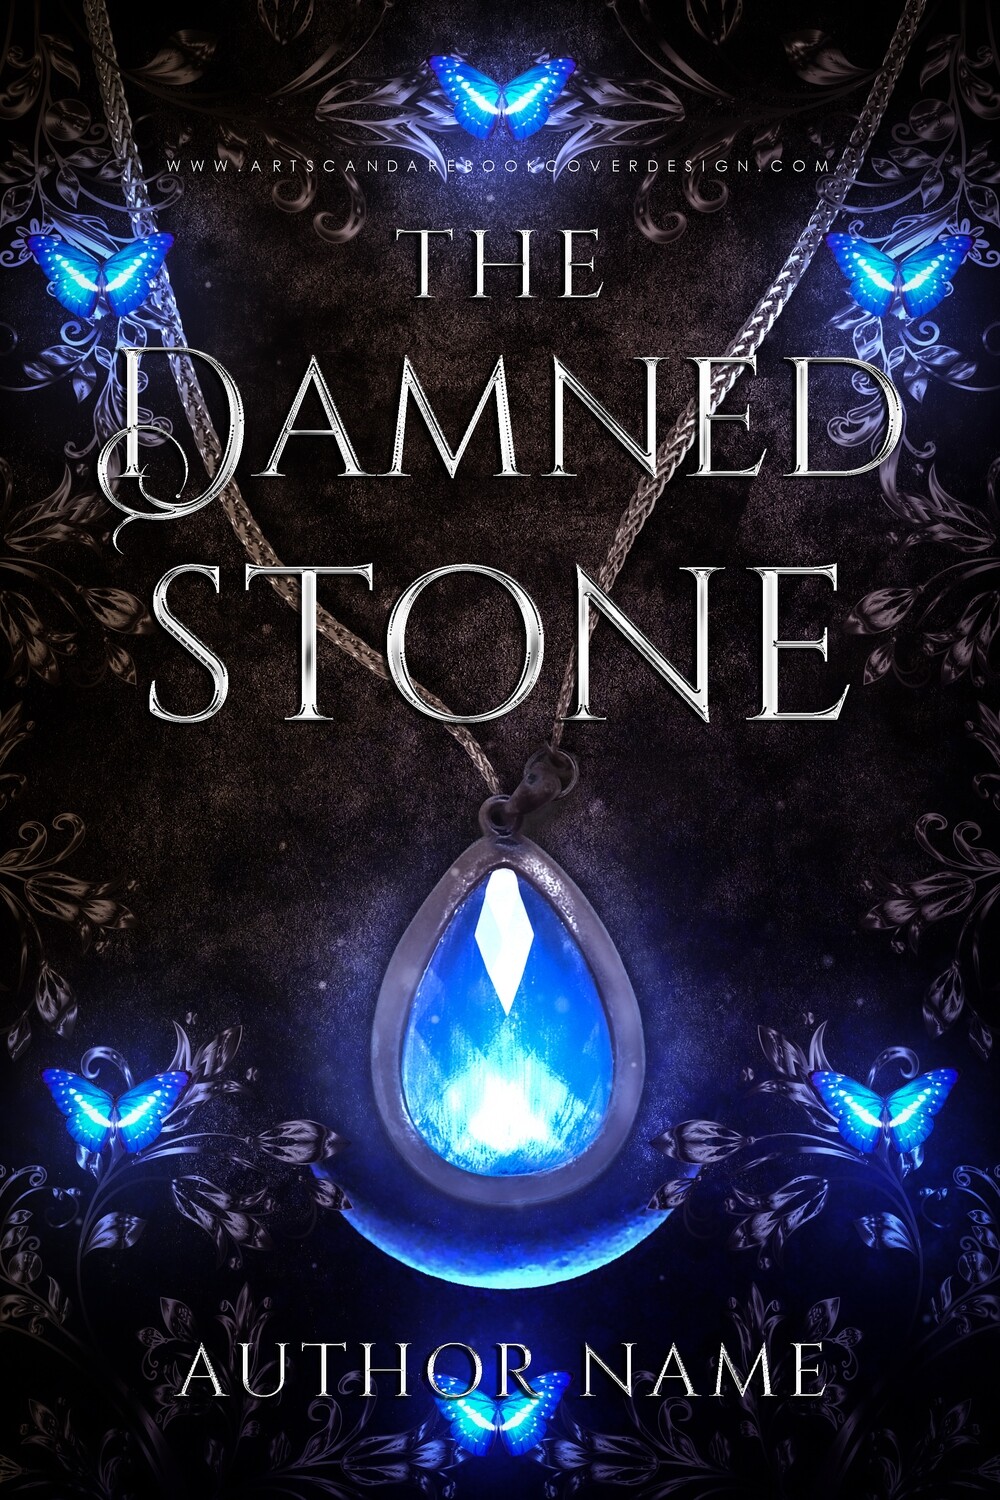 Ebook: The Damned Stone